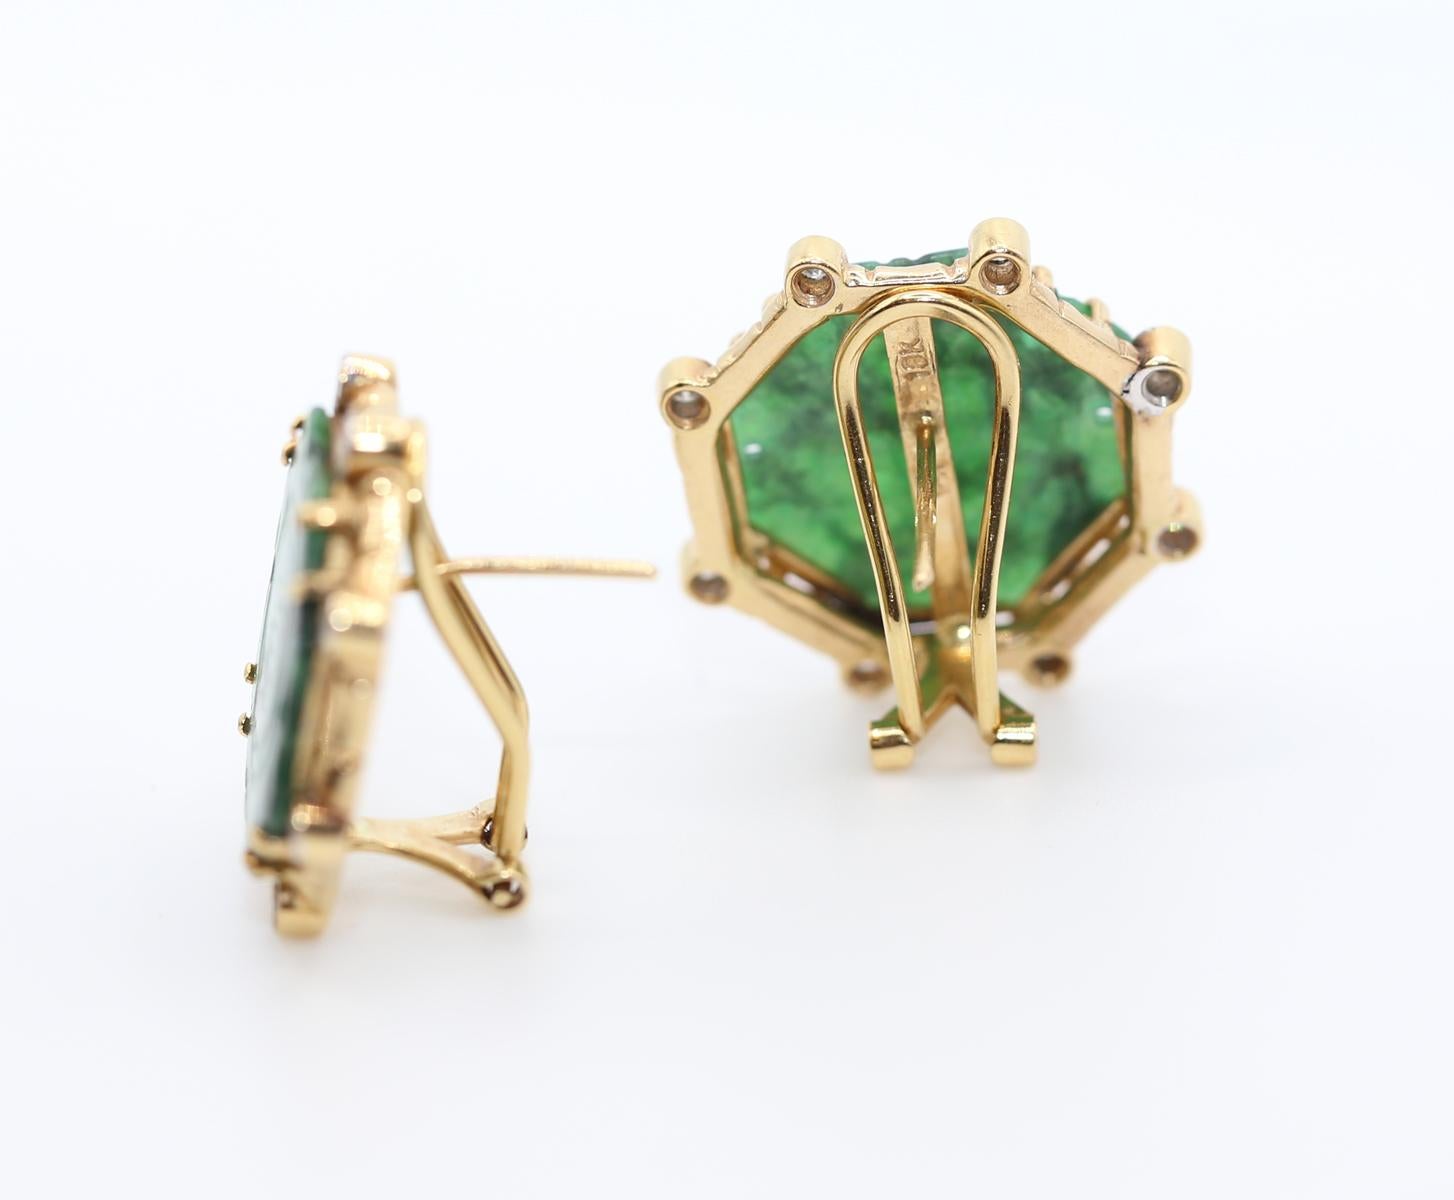 Round Cut Carved Jade And Diamond Earclips 18K Gold, 1970 For Sale